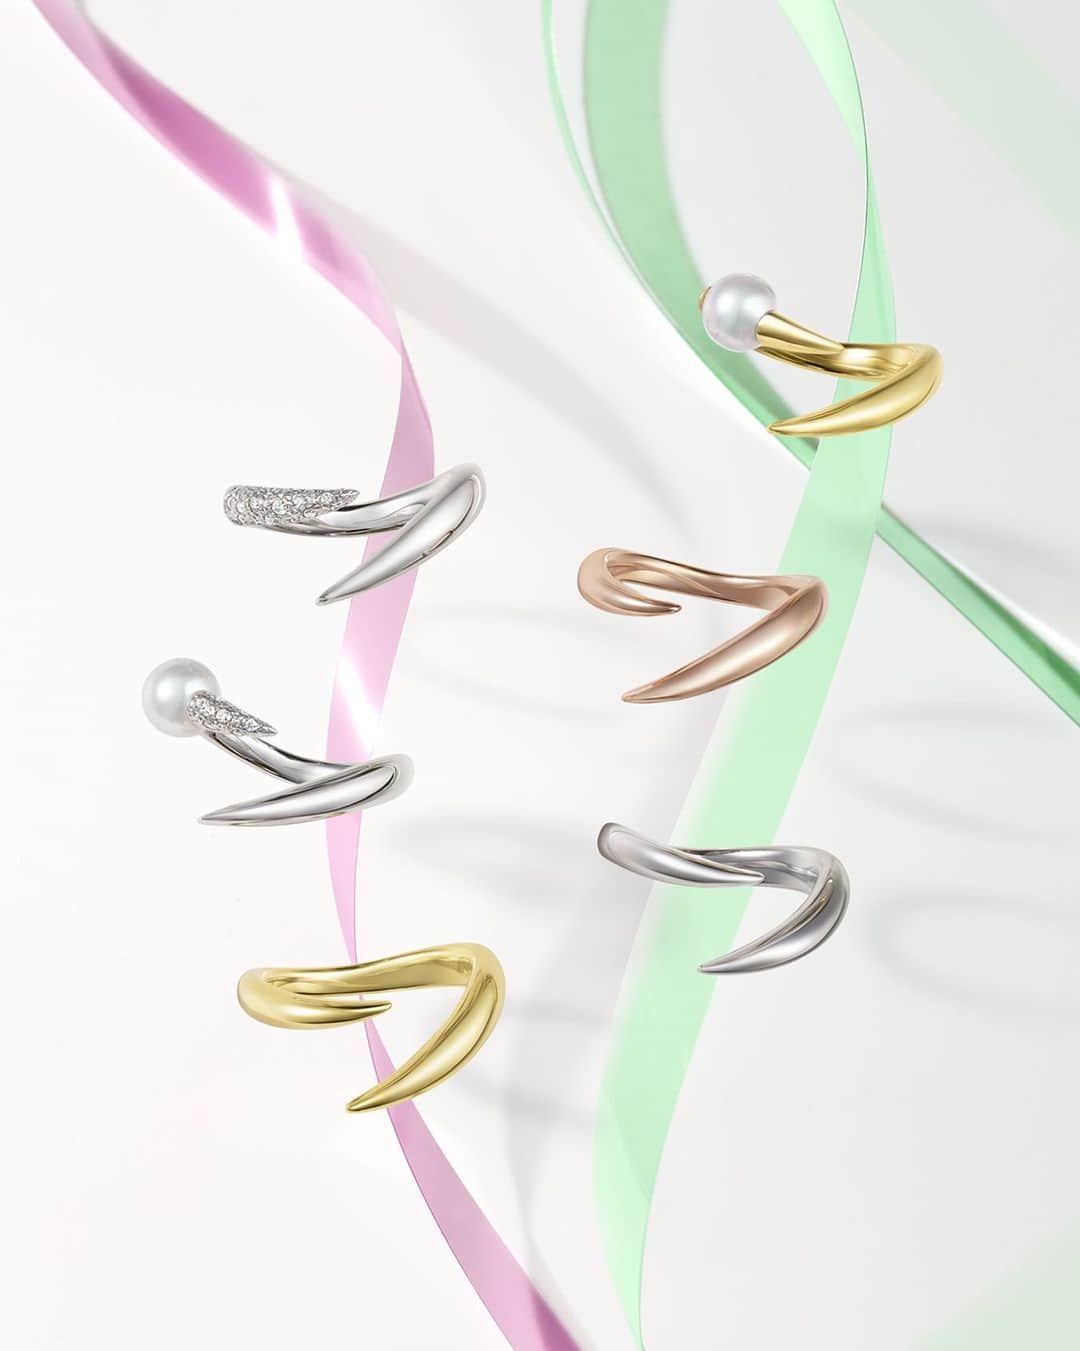 TASAKIのインスタグラム：「The 'danger horn plus' rings introduce a fresh style to finger fashion. Mix and match colours and materials, interchange and harmonise to your heart's content.  指先に新しいスタイルをもたらす「danger horn plus」のリング。 着こなしや気分次第で、メタルのカラーや素材をミックスしたりリングの向きを変えたり、プレイフルに楽しんで。  #TASAKI #TASAKIdanger #TASAKIpearl」